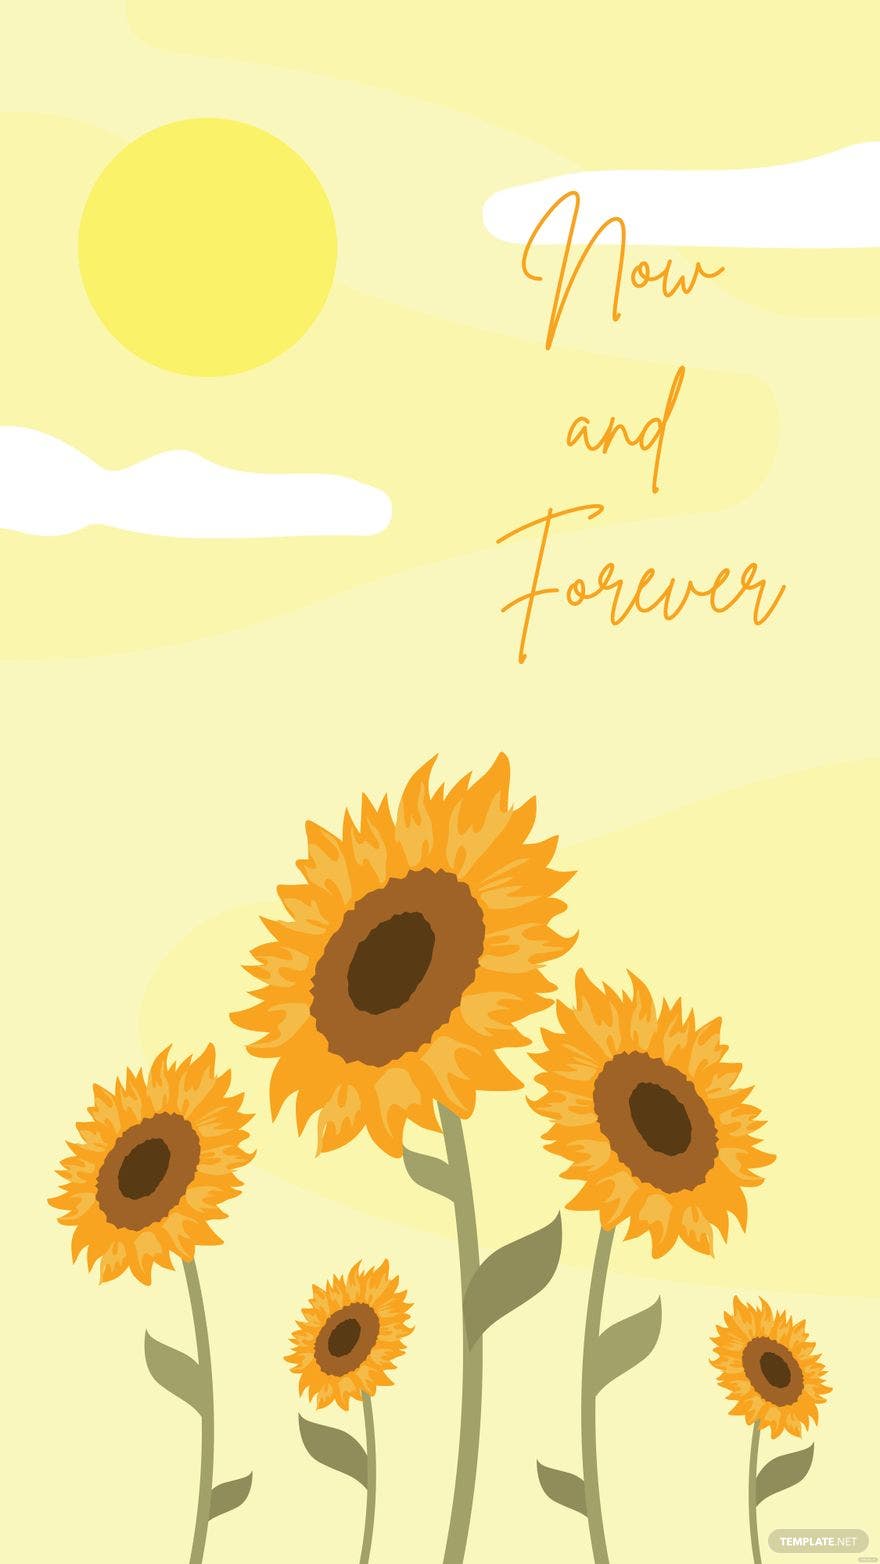 A yellow card with sunflowers and the words 